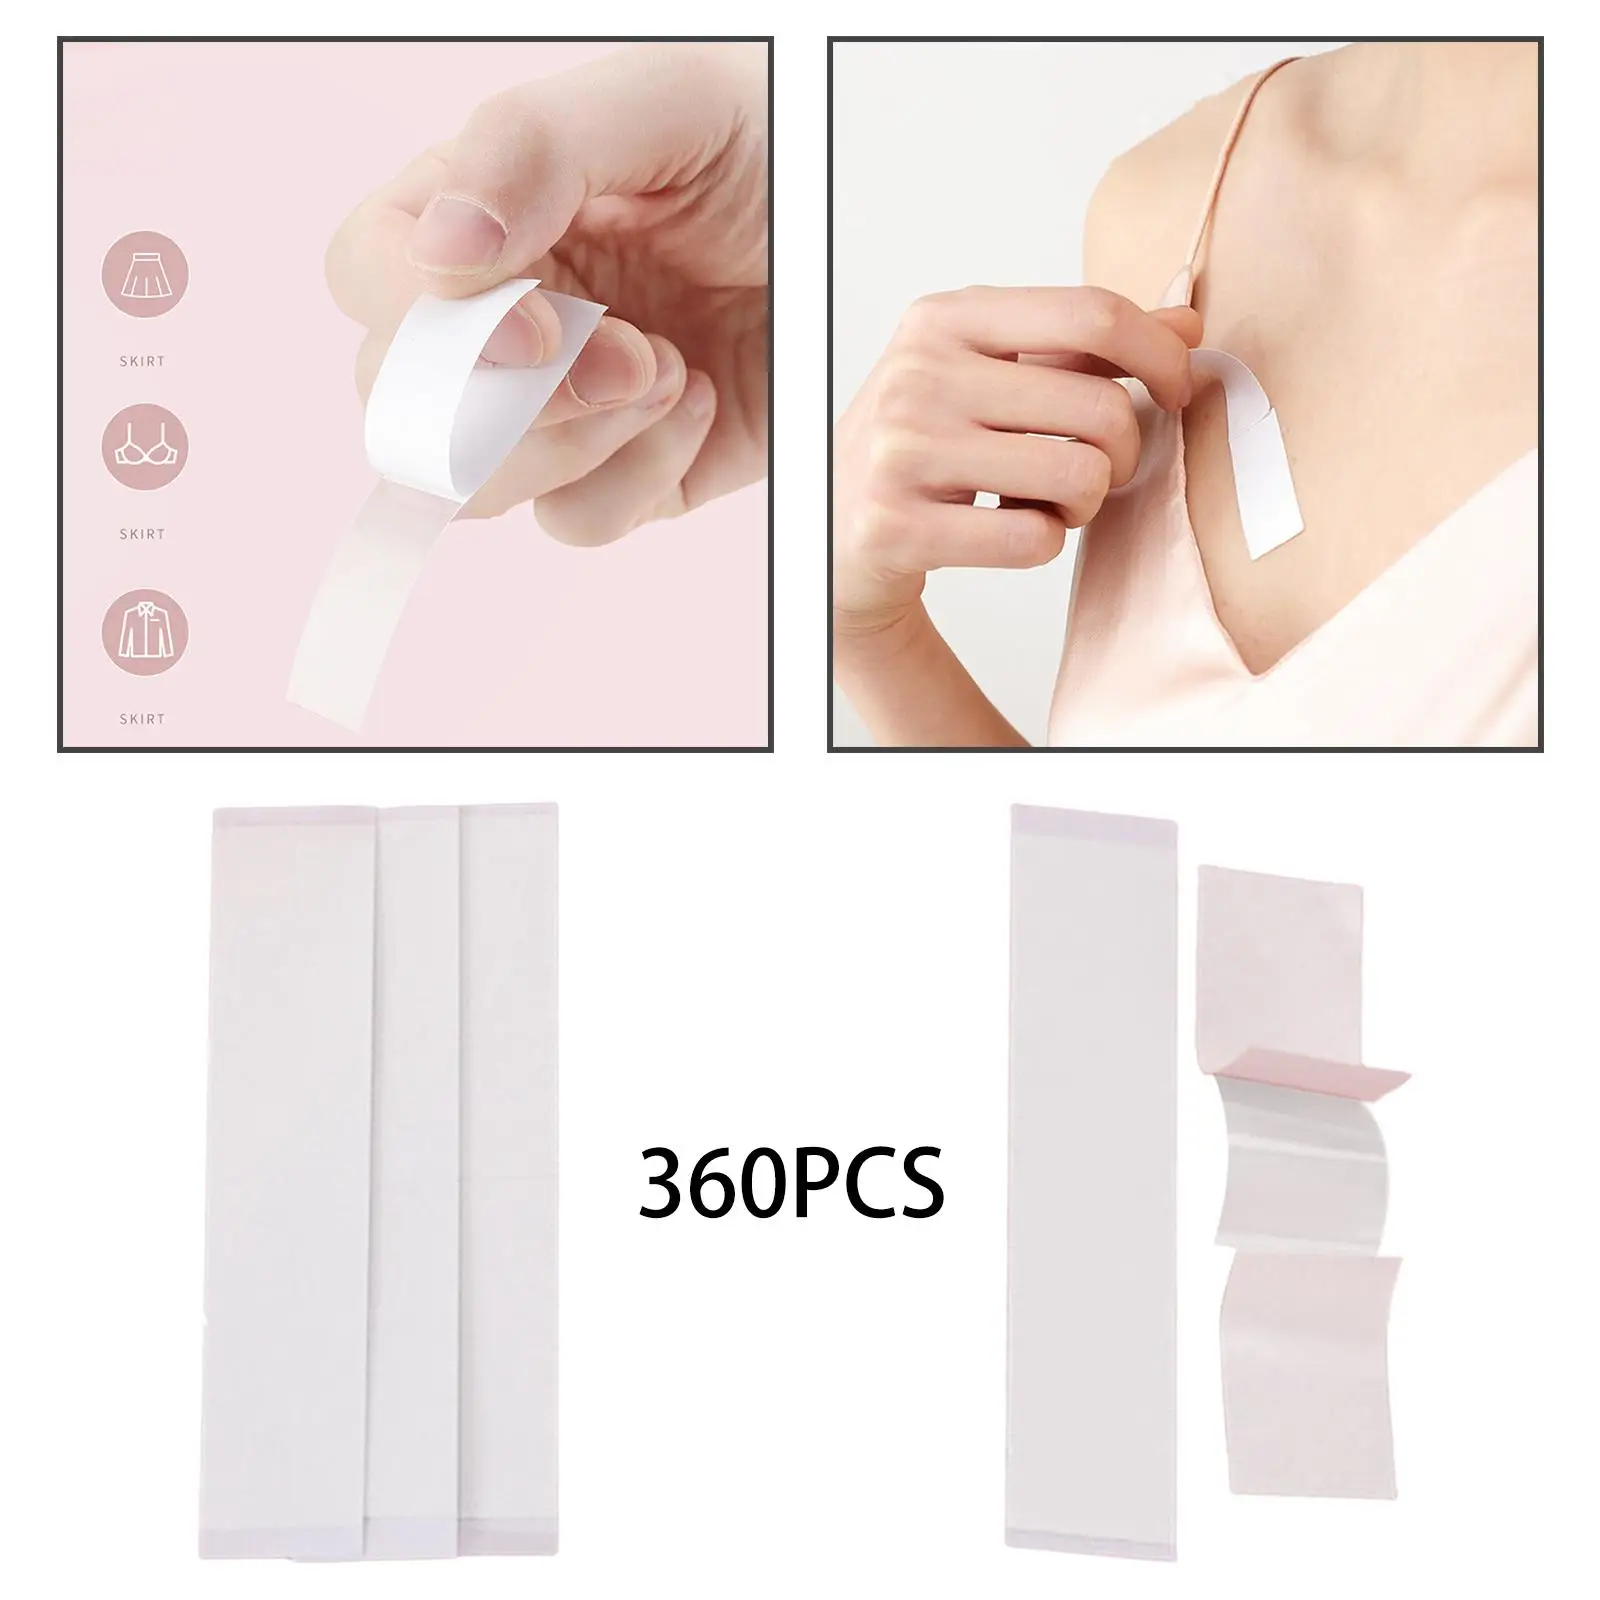 360 Pieces Transparent Clear for Skin Body Tape for Skin for Dresses All Fabric Types Bra Shoulder Straps Clothes